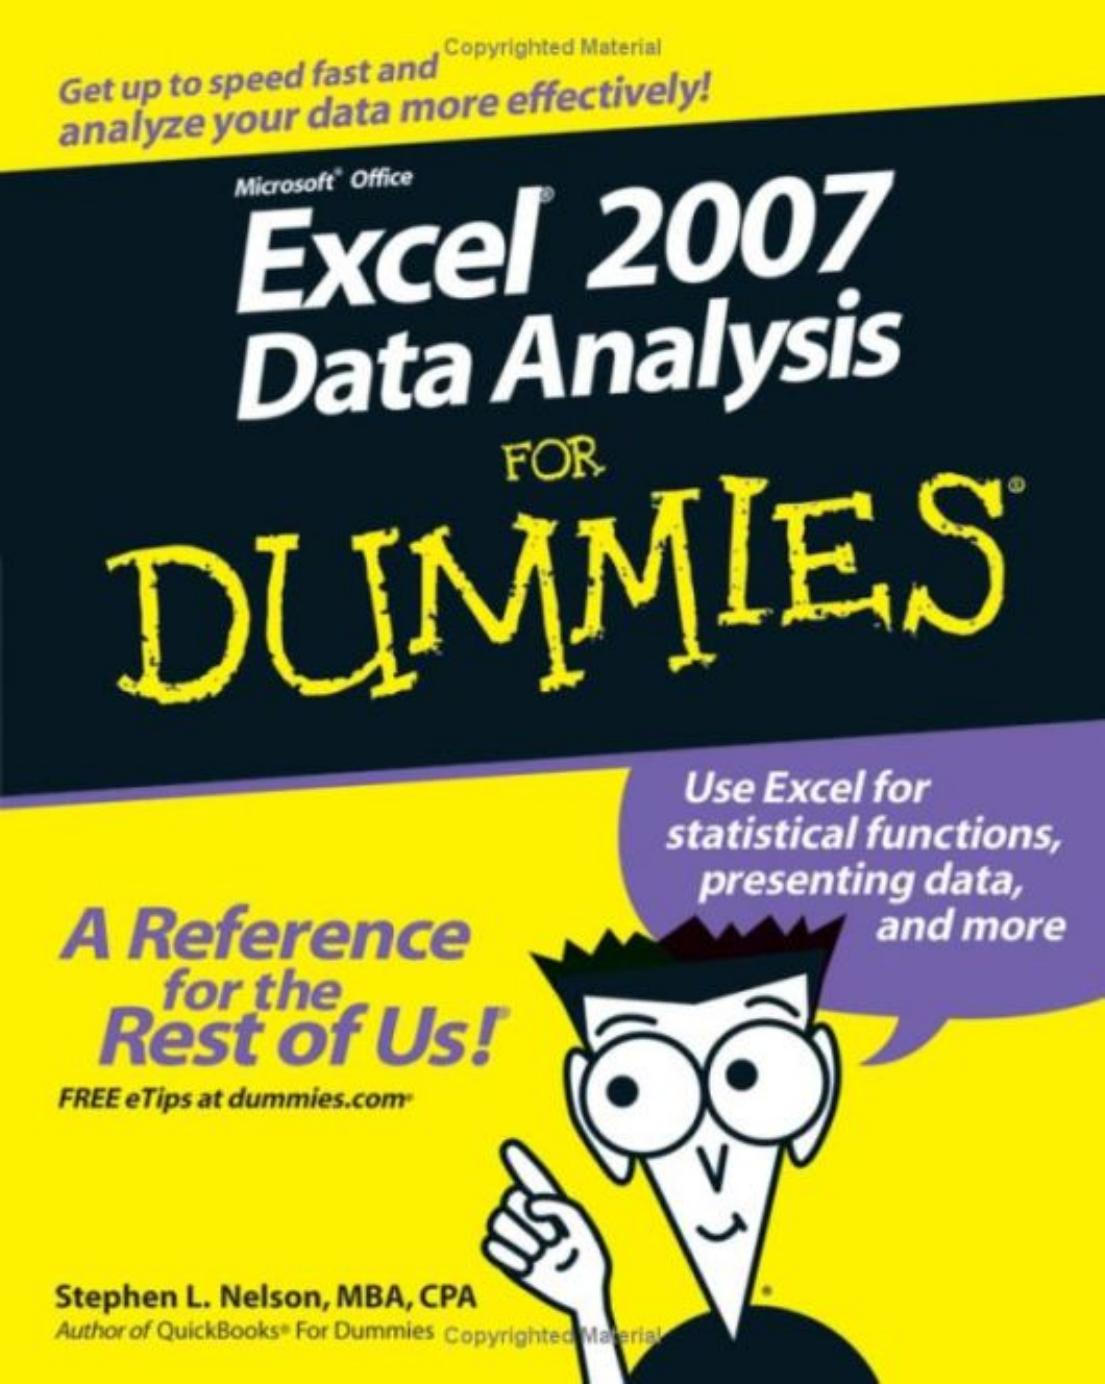 excel data analysis for DUMMIES 2007